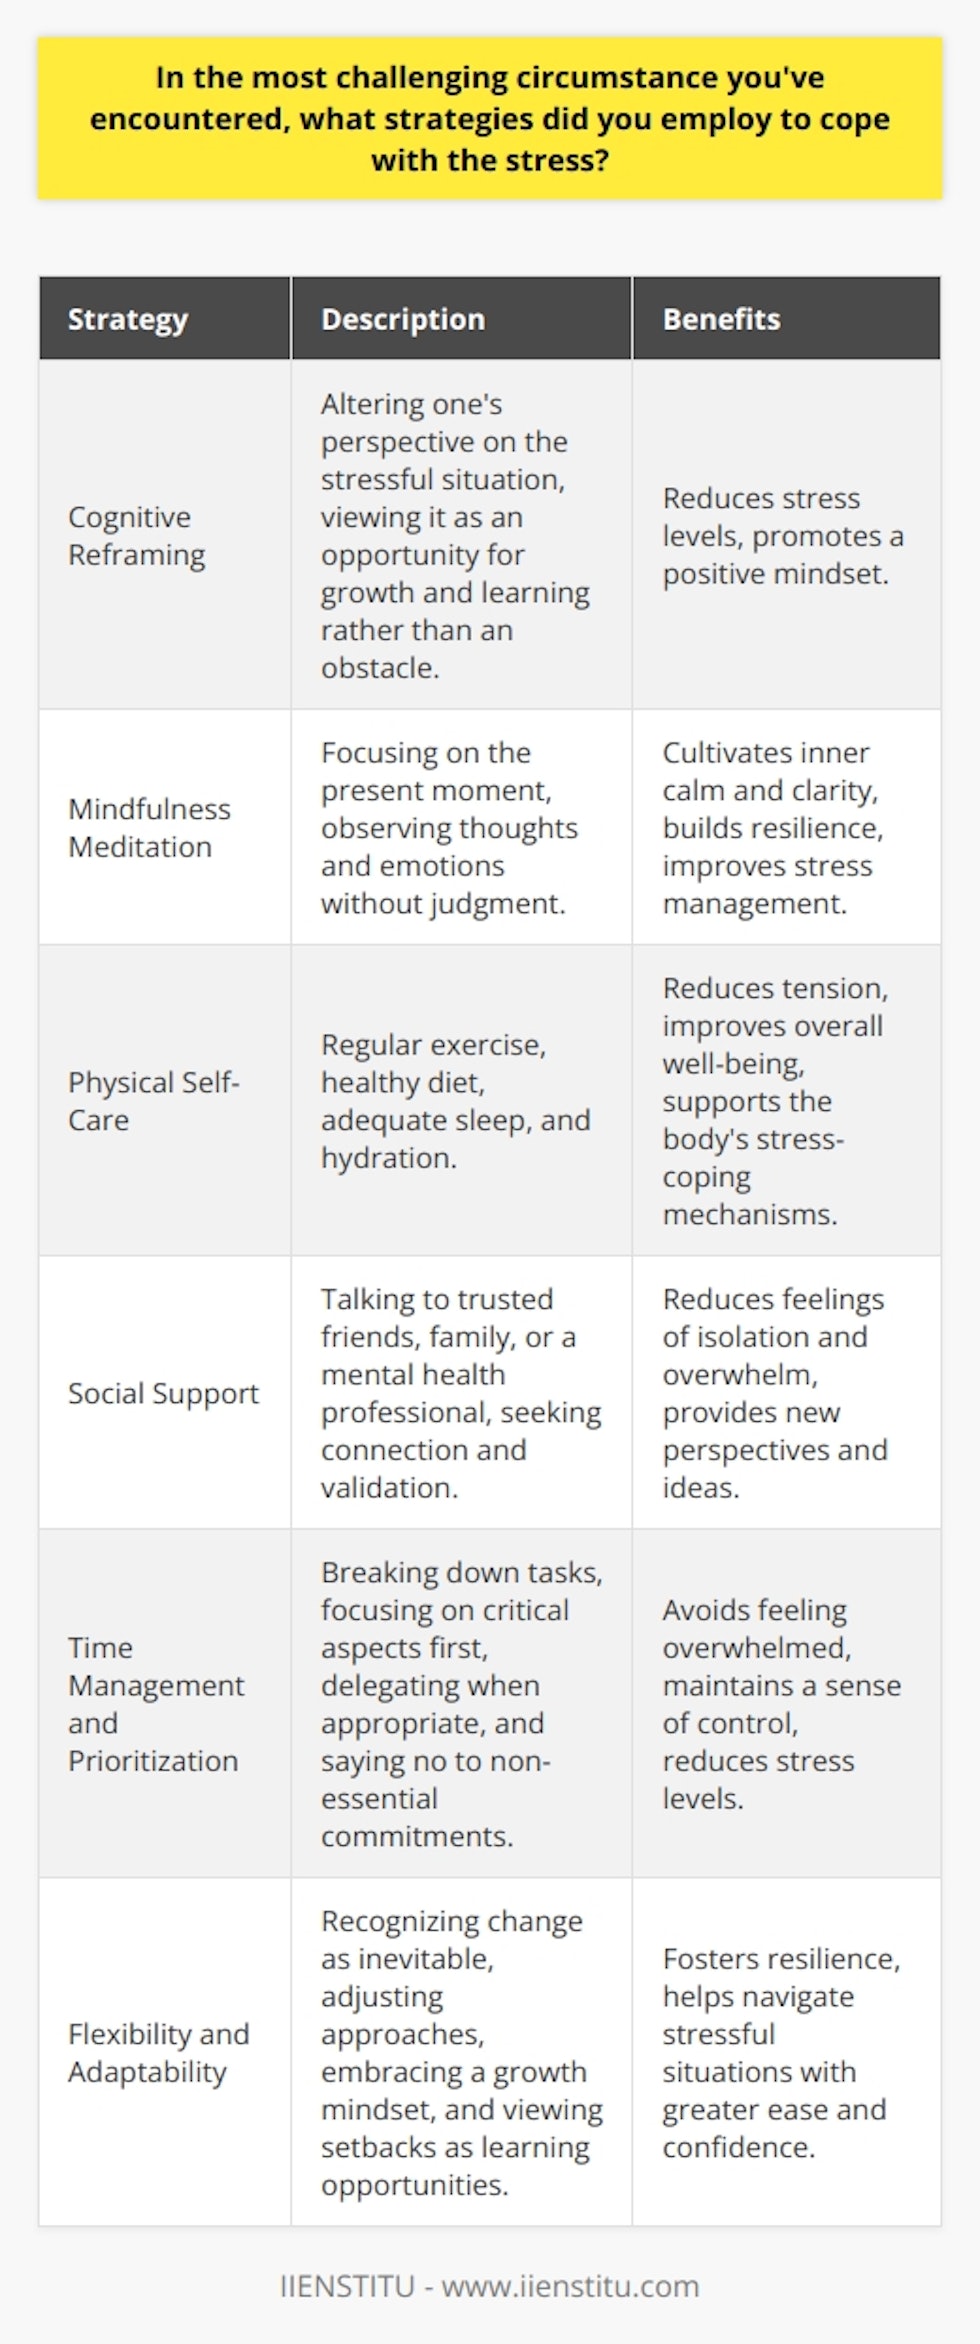 Coping with stress in challenging circumstances requires a multifaceted approach that involves both mental and physical strategies. One effective technique is cognitive reframing, which involves altering ones perspective on the stressful situation. By viewing the challenge as an opportunity for growth and learning, rather than an insurmountable obstacle, individuals can reduce their stress levels and approach the problem with a more positive mindset. The Role of Mindfulness in Stress Management Mindfulness meditation is another powerful tool for managing stress in difficult situations. By focusing on the present moment and observing ones thoughts and emotions without judgment, individuals can cultivate a sense of inner calm and clarity. Regular mindfulness practice can help build resilience and improve ones ability to handle stress in the long term. Physical Strategies for Coping with Stress In addition to mental strategies, physical self-care is crucial for managing stress. Engaging in regular exercise, such as walking, jogging, or yoga, can help reduce tension and improve overall well-being. Maintaining a healthy diet, staying hydrated, and getting sufficient sleep are also essential for supporting the bodys natural stress-coping mechanisms. The Importance of Social Support Seeking social support is another effective strategy for coping with stress in challenging circumstances. Talking to trusted friends, family members, or a mental health professional can provide a sense of connection and validation, reducing feelings of isolation and overwhelm. Surrounding oneself with supportive individuals can also offer new perspectives and ideas for navigating difficult situations. Time Management and Prioritization Effective time management and prioritization can help alleviate stress in demanding circumstances. By breaking down large tasks into smaller, manageable steps and focusing on the most critical aspects first, individuals can avoid feeling overwhelmed and maintain a sense of control. Learning to say no to non-essential commitments and delegating tasks when appropriate can also help reduce stress levels. Embracing Flexibility and Adaptability In the face of challenging circumstances, it is essential to remain flexible and adaptable. Recognizing that change is inevitable and being open to adjusting ones approach can help reduce stress and foster resilience. By embracing a growth mindset and viewing setbacks as opportunities for learning and improvement, individuals can navigate stressful situations with greater ease and confidence. Ultimately, coping with stress in the most challenging circumstances requires a combination of mental, physical, and social strategies. By cultivating mindfulness, engaging in self-care, seeking support, managing time effectively, and embracing adaptability, individuals can build the resilience needed to navigate lifes most difficult moments with greater ease and grace.